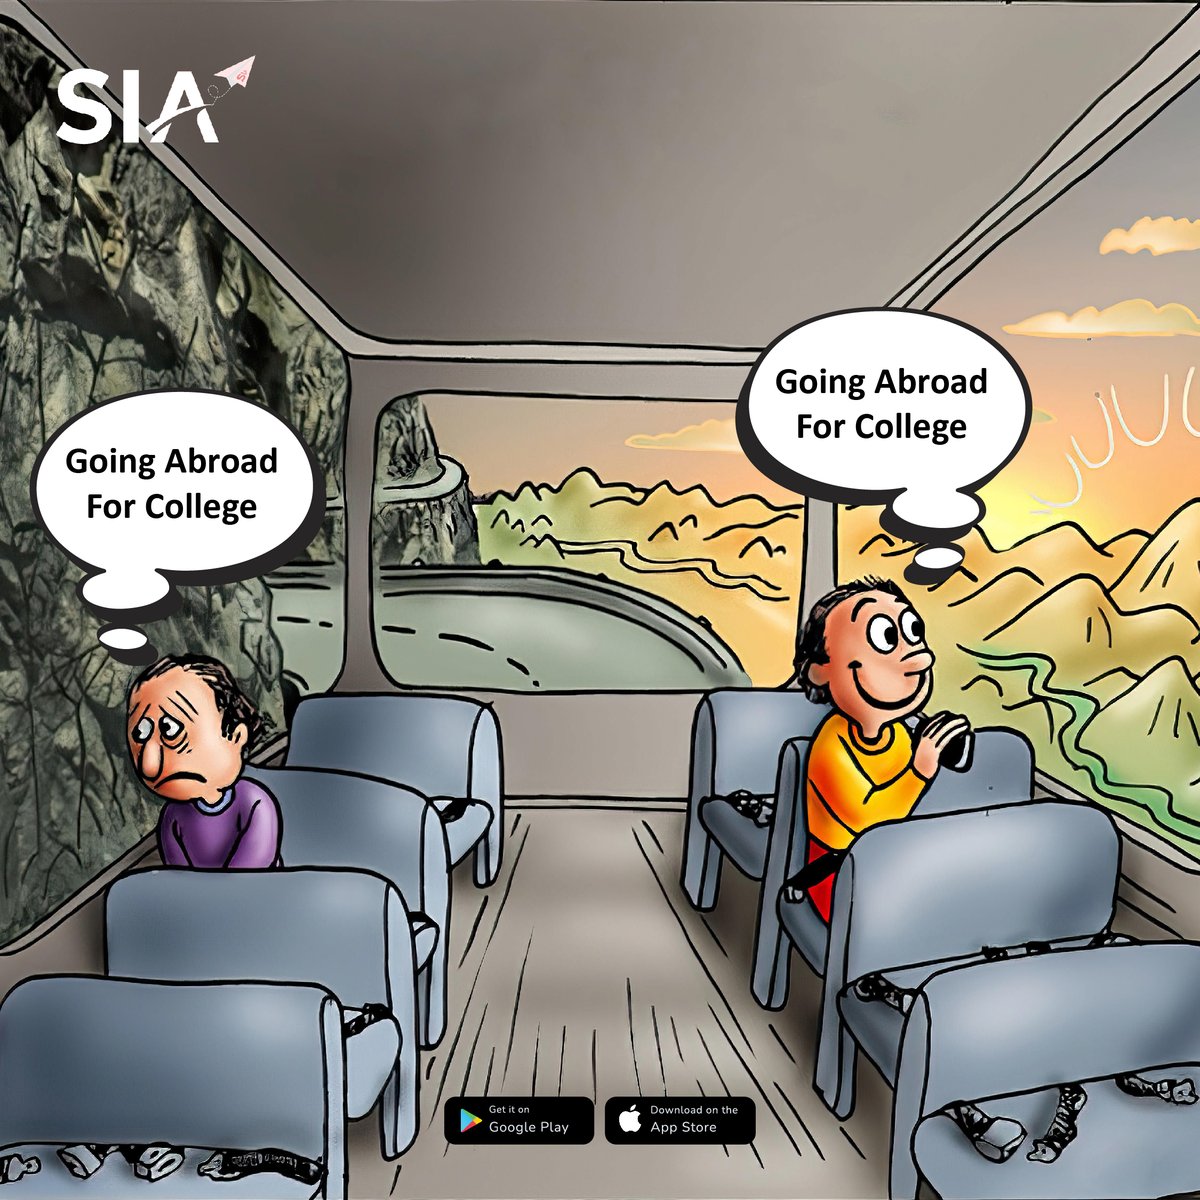 Studying abroad doesn't have to be such a mood killer! 

Let Sia Consultants make your journey to studying in Australia a breeze. 🌏✈️ 
.
.
.
#StudyingInAustralia #SiaConsultants #StudyAbroadMadeEasy